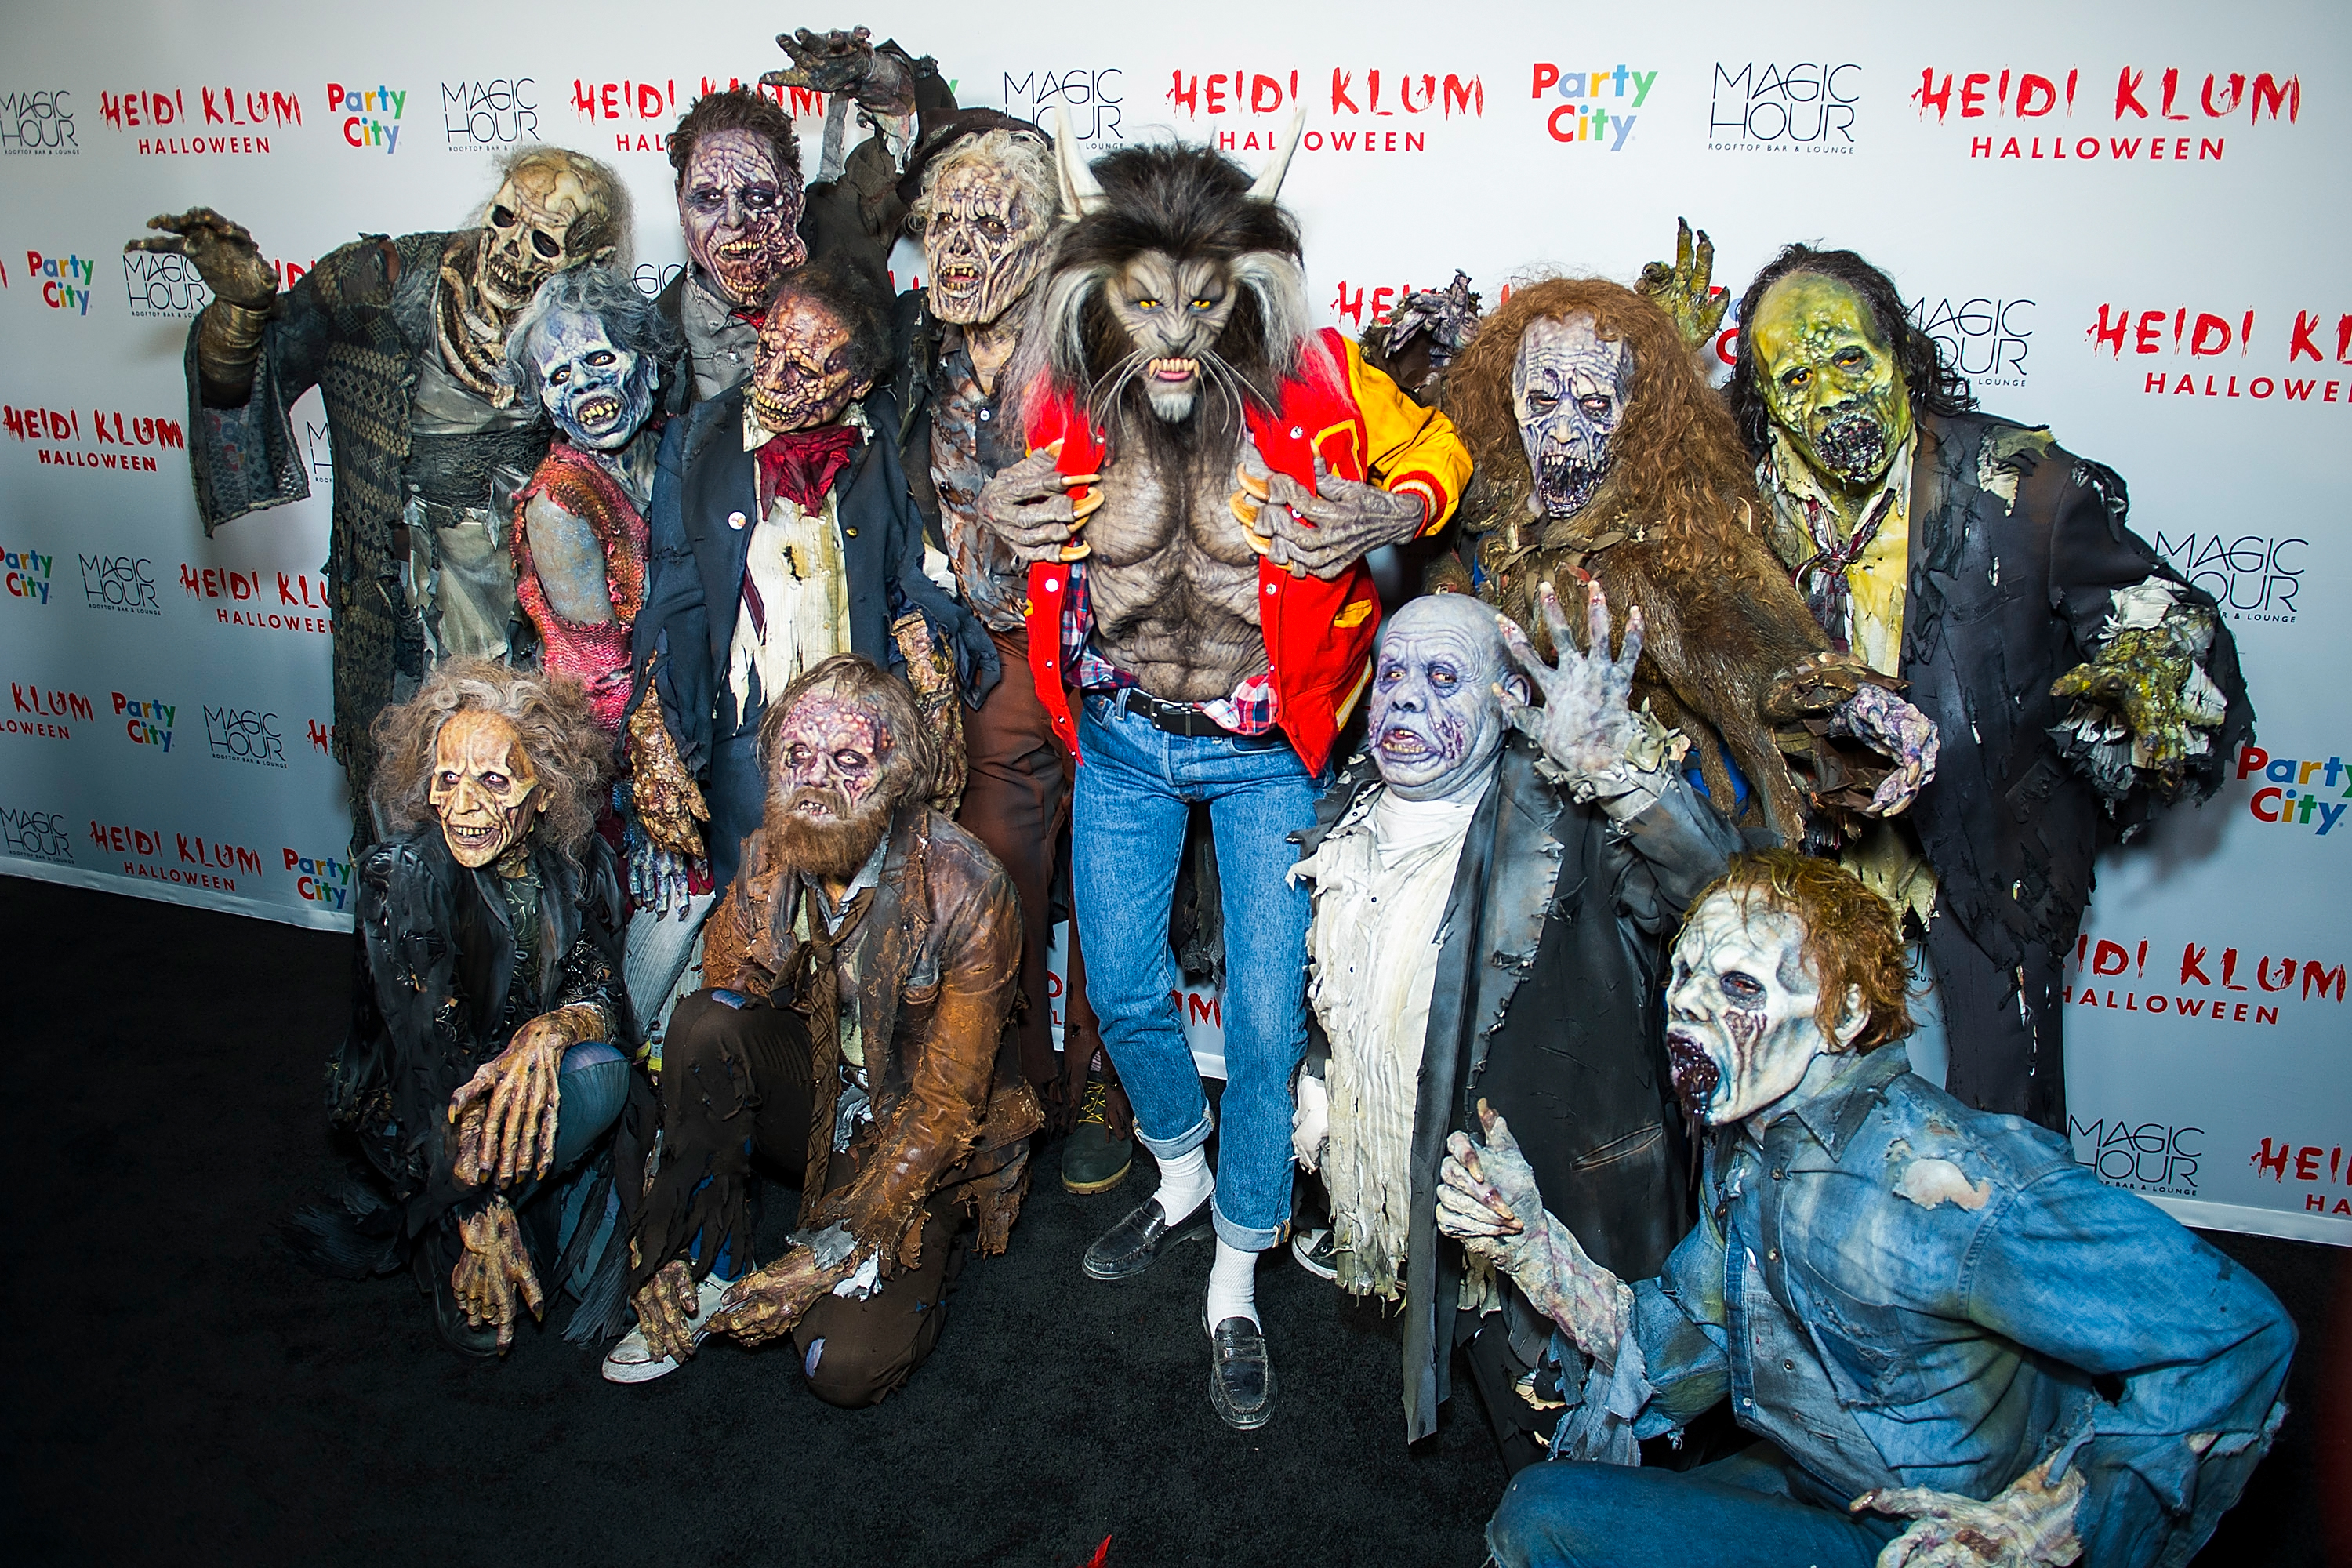 Heidi Klum attends her 18th Annual Halloween Party in New York City. (Photo by Michael Stewart/Getty Images) (Michael Stewart—Getty Images)